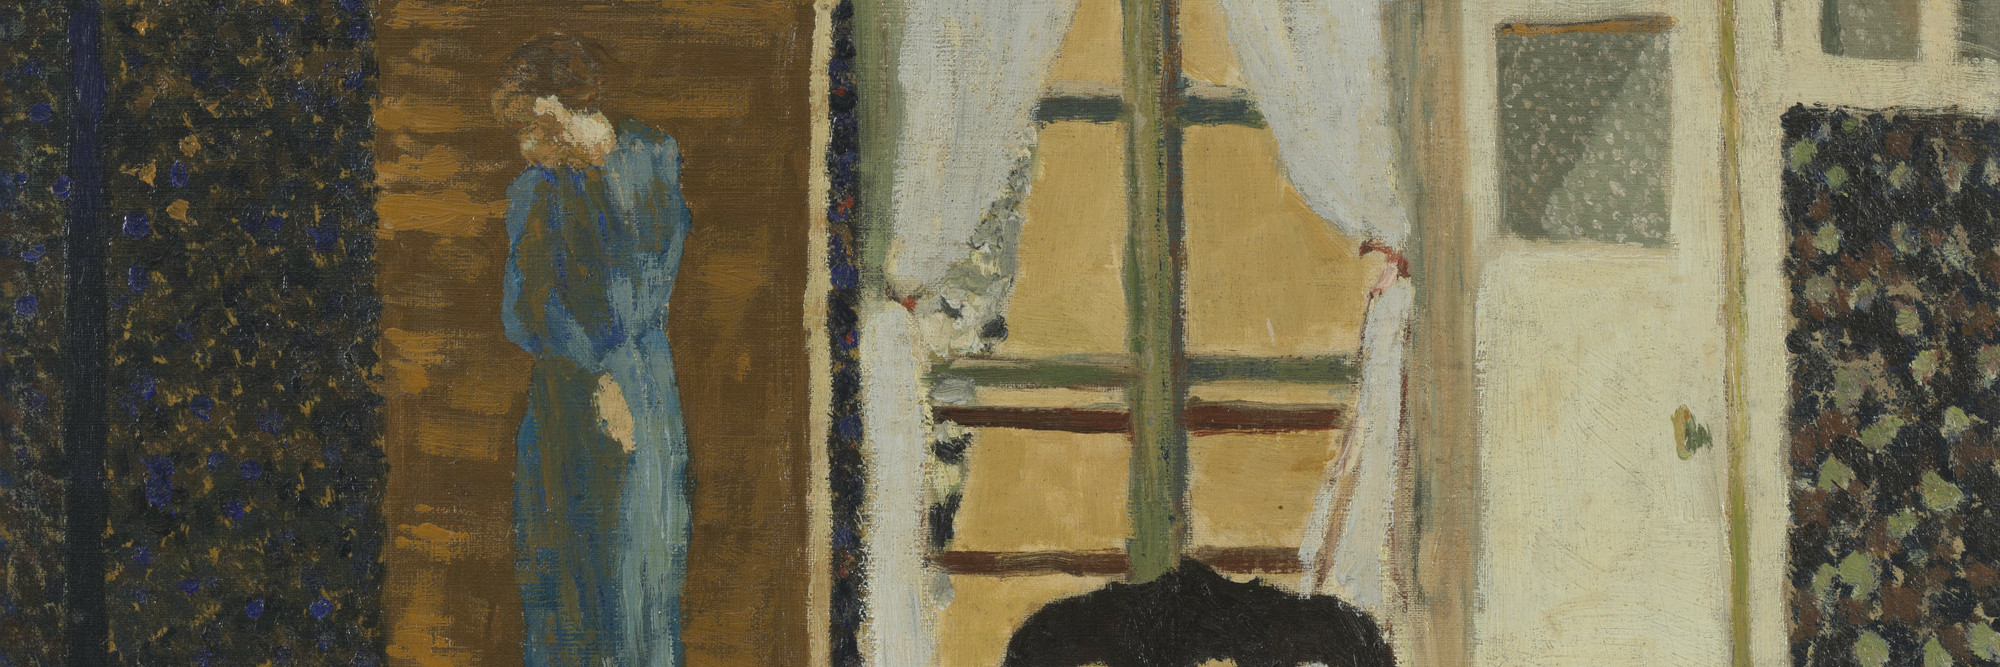 Édouard Vuillard. The Window. 1894. Oil on canvas, 14 7/8 x 17 7/8&#34; (37.9 x 45.5 cm). The William S. Paley Collection. © 2022 Artists Rights Society (ARS), New York / ADAGP, Paris